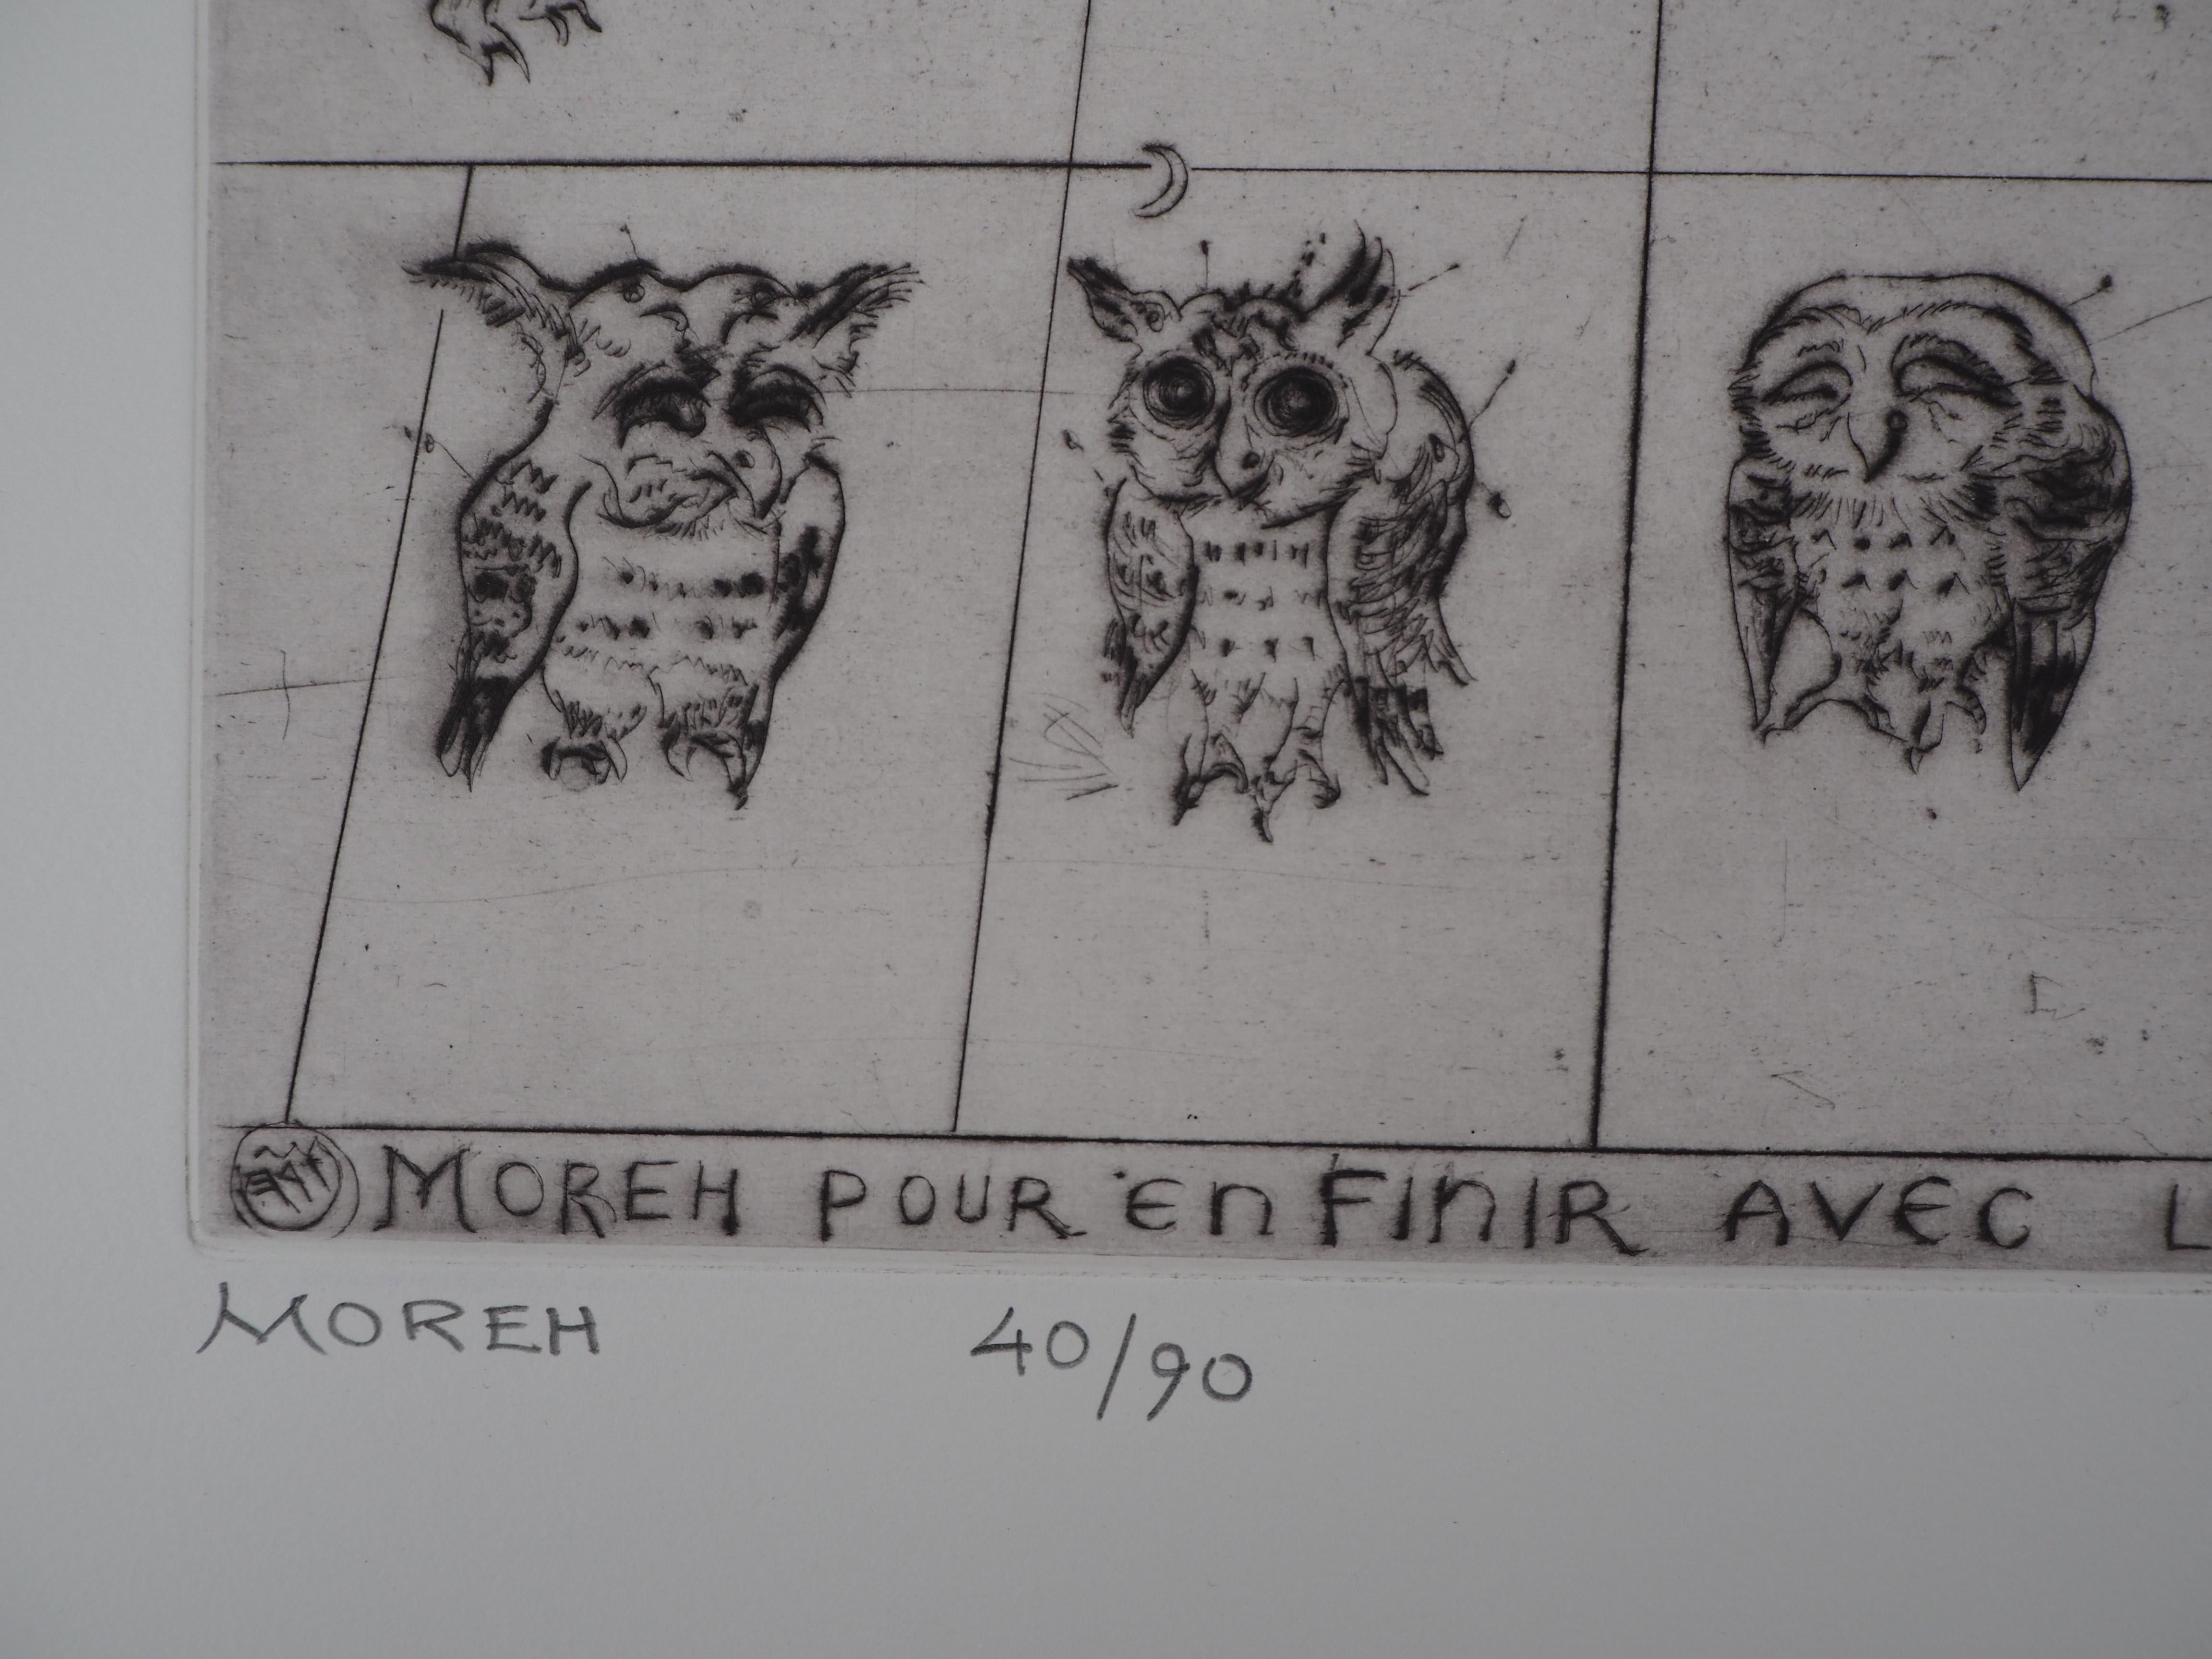  To Finish with the Owls - Original handsigned etching, Ltd 90 copies - Modern Print by Mordecai Moreh